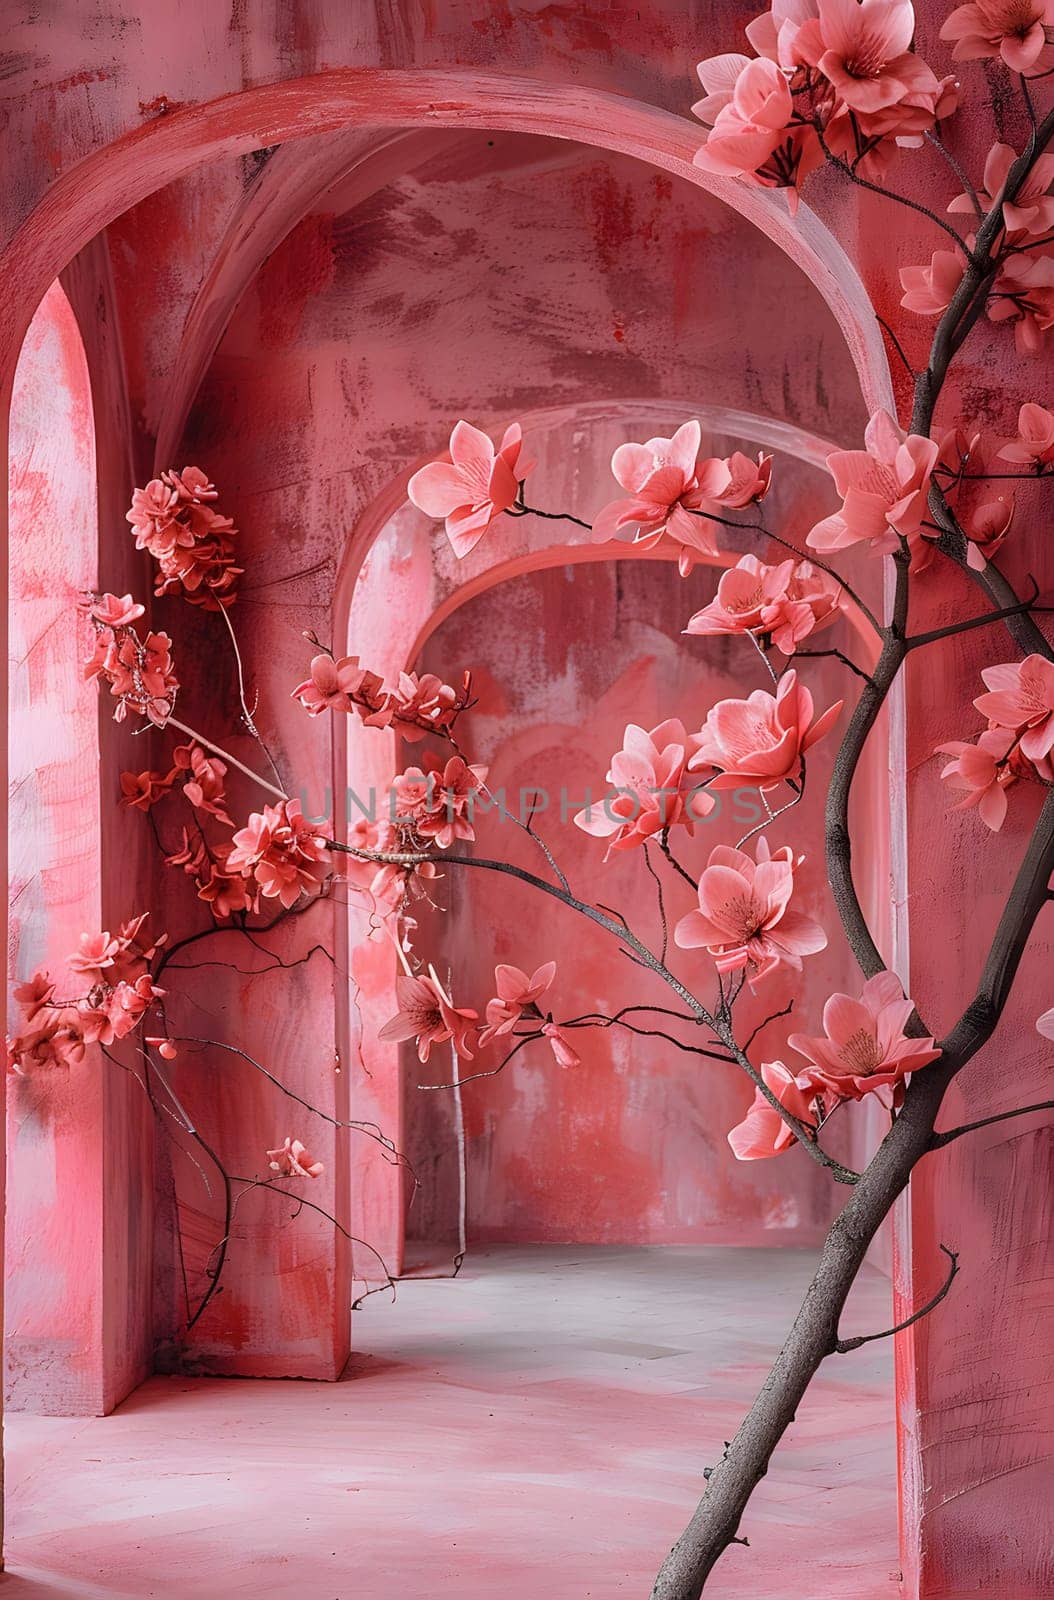 A pink room with floral arches and branches in bloom by Nadtochiy